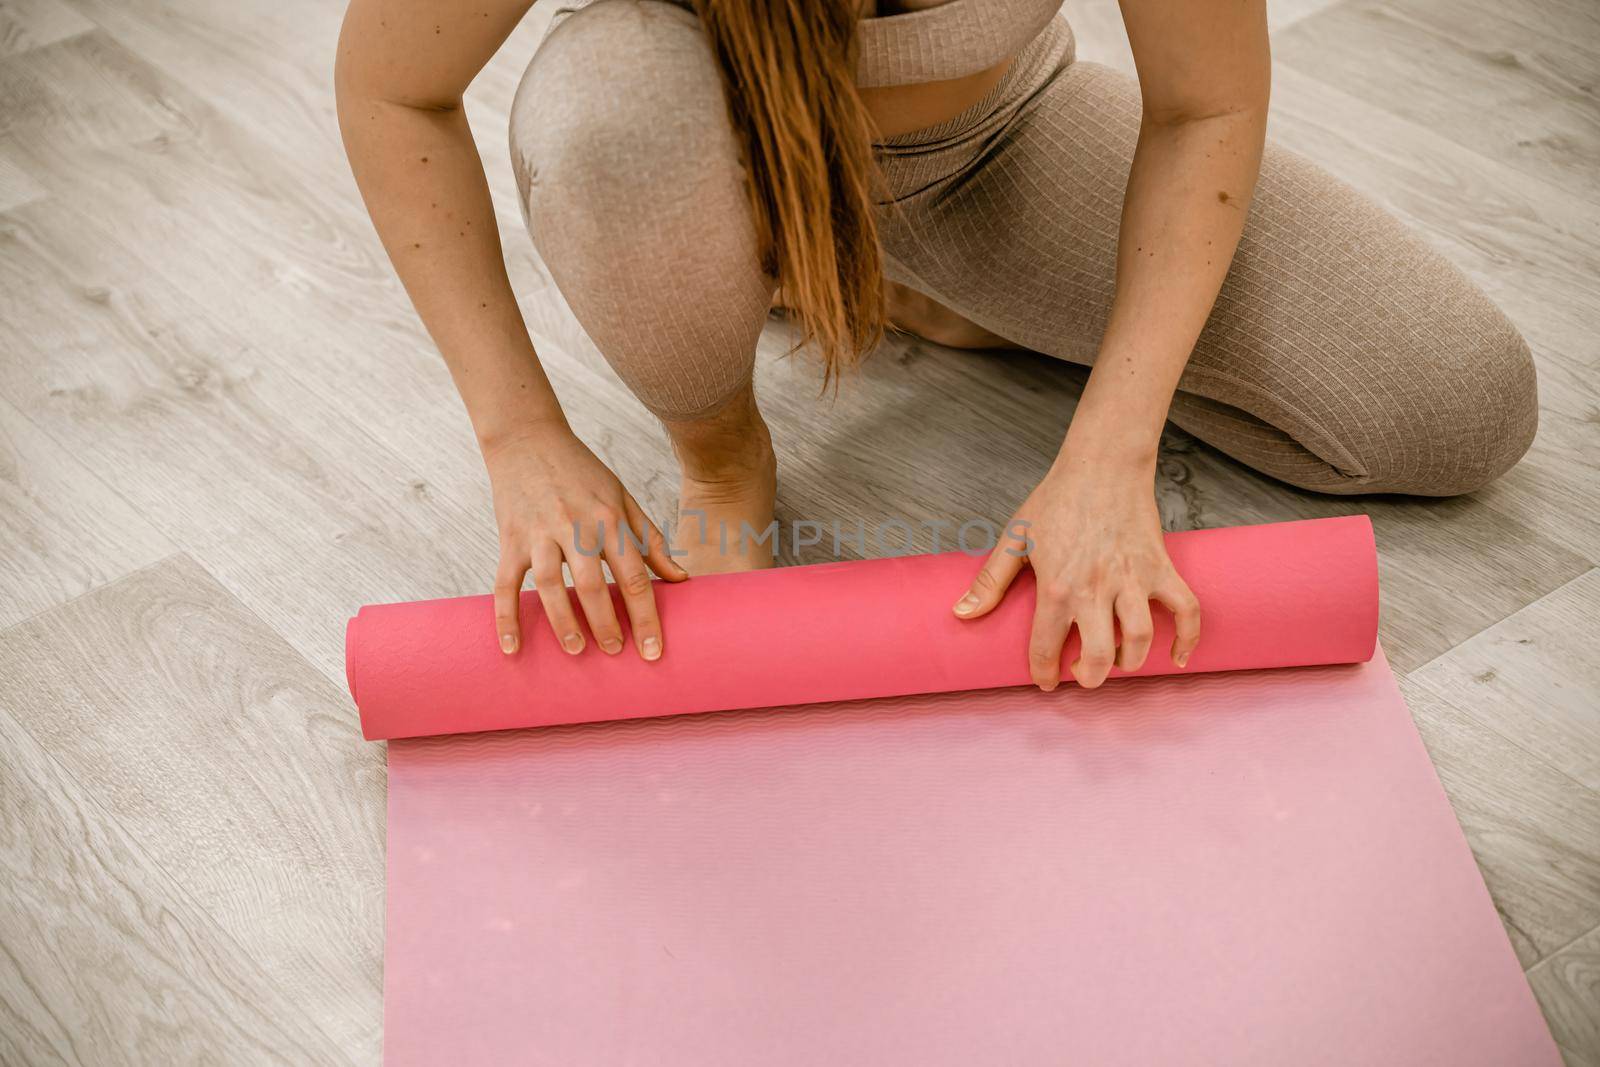 A young woman rolls a pink fitness or yoga mat before or after exercising, exercising at home in the living room or in a yoga studio. Healthy habits, keep fit, weight loss concept. Closeup photo.